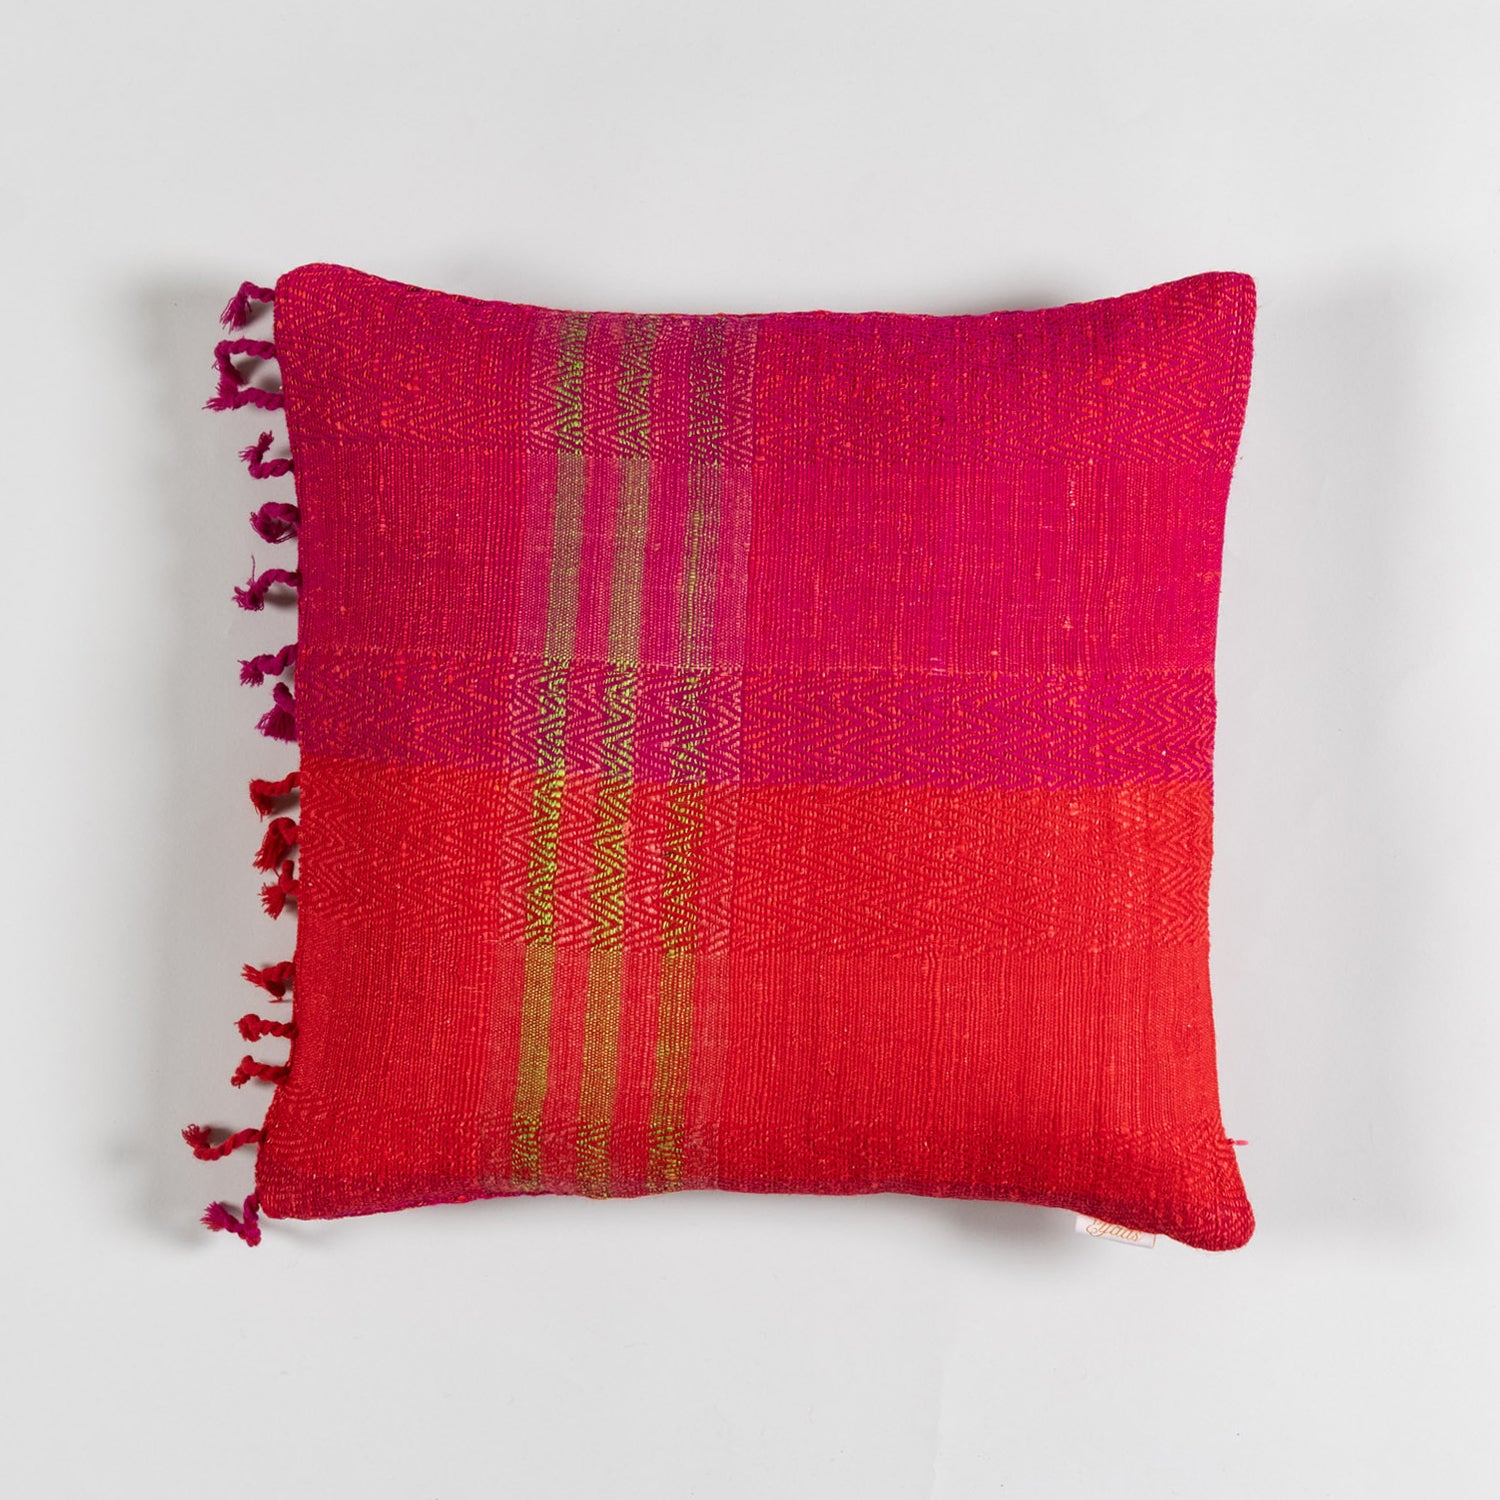 Handwoven Upcycled Red & Pink Wool & Oak Silk Cushion Cover - 16x16